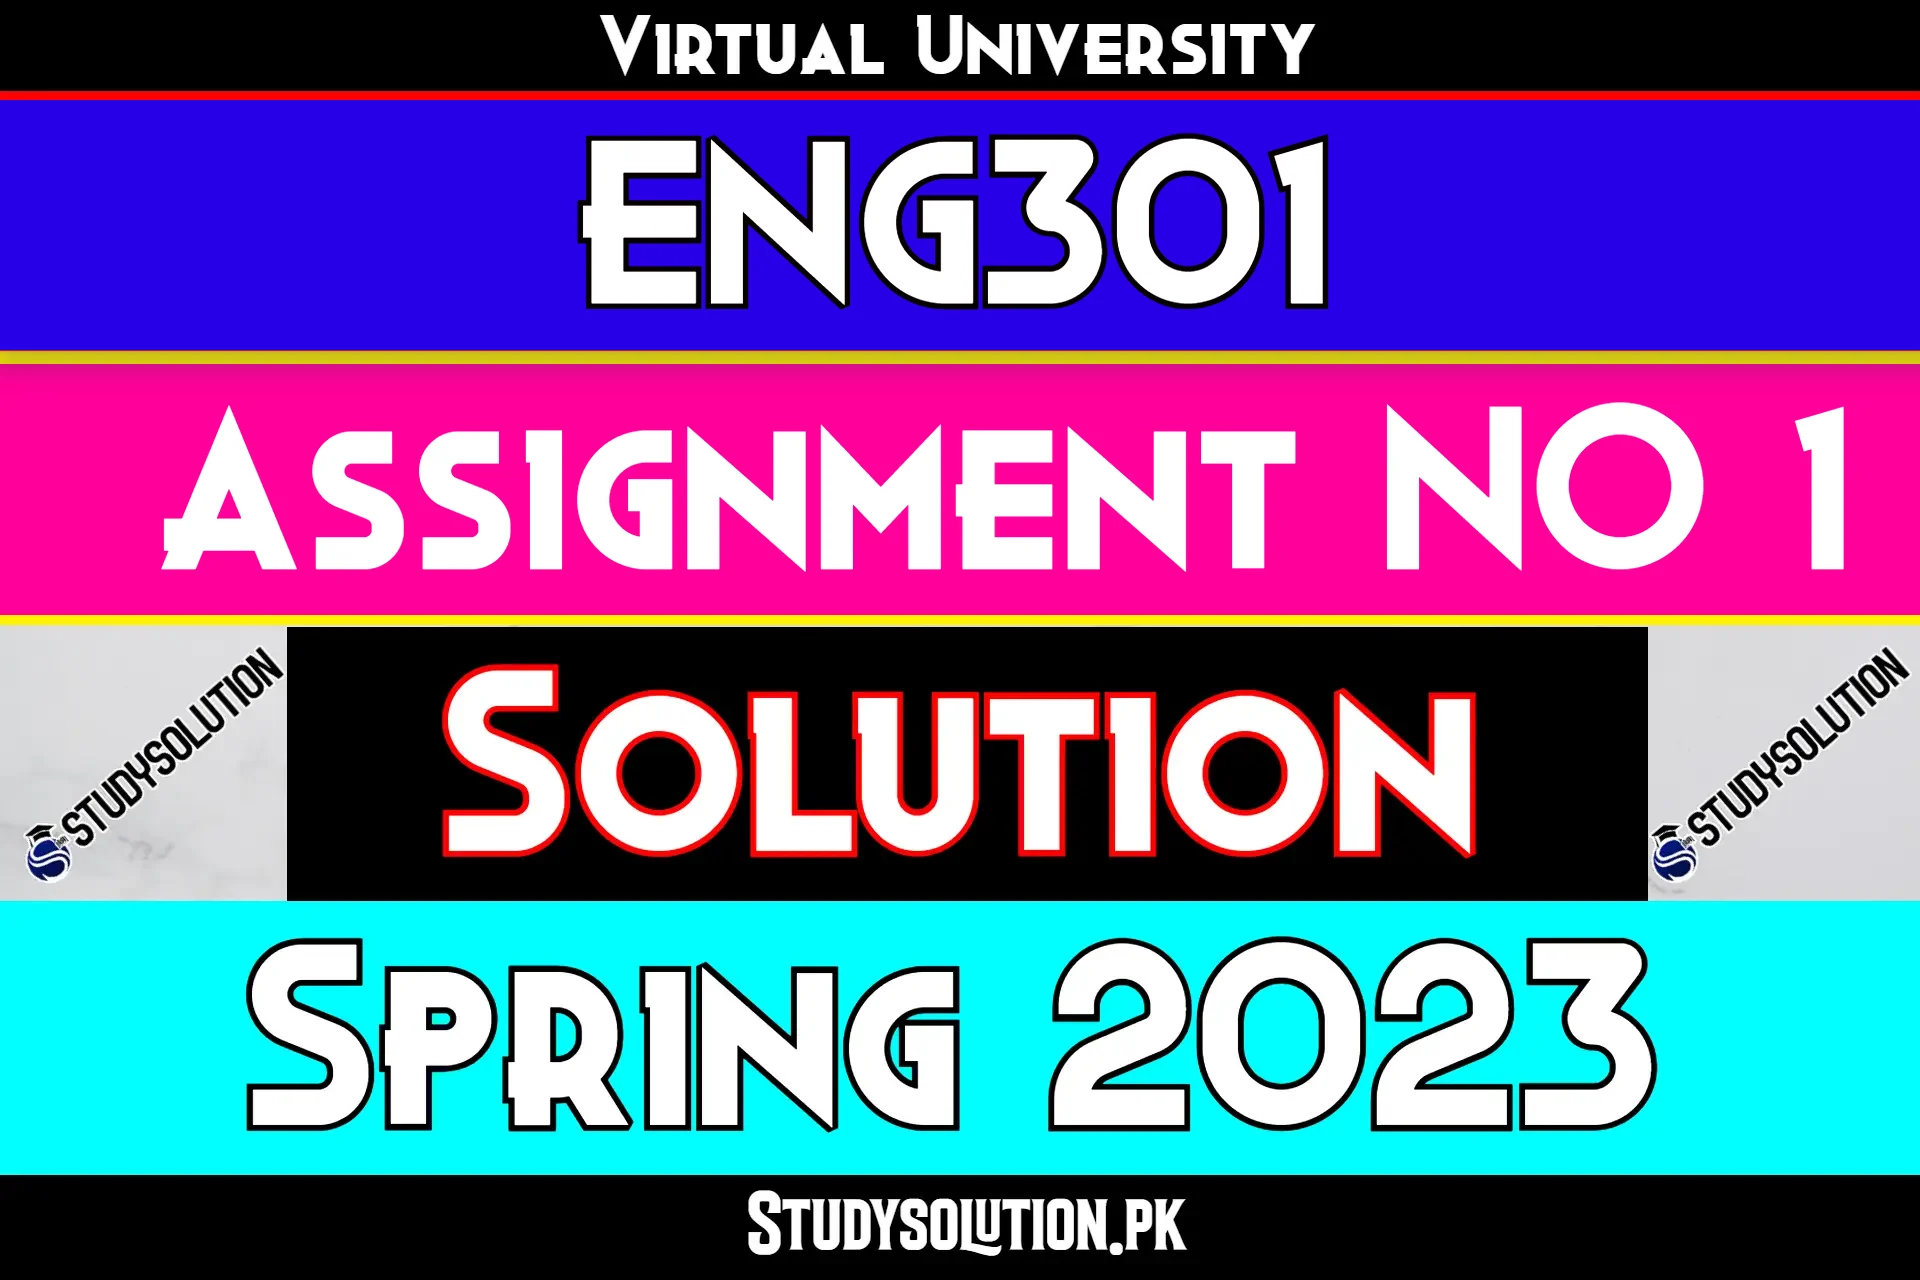 ENG301 Assignment No 1 Solution Spring 2023